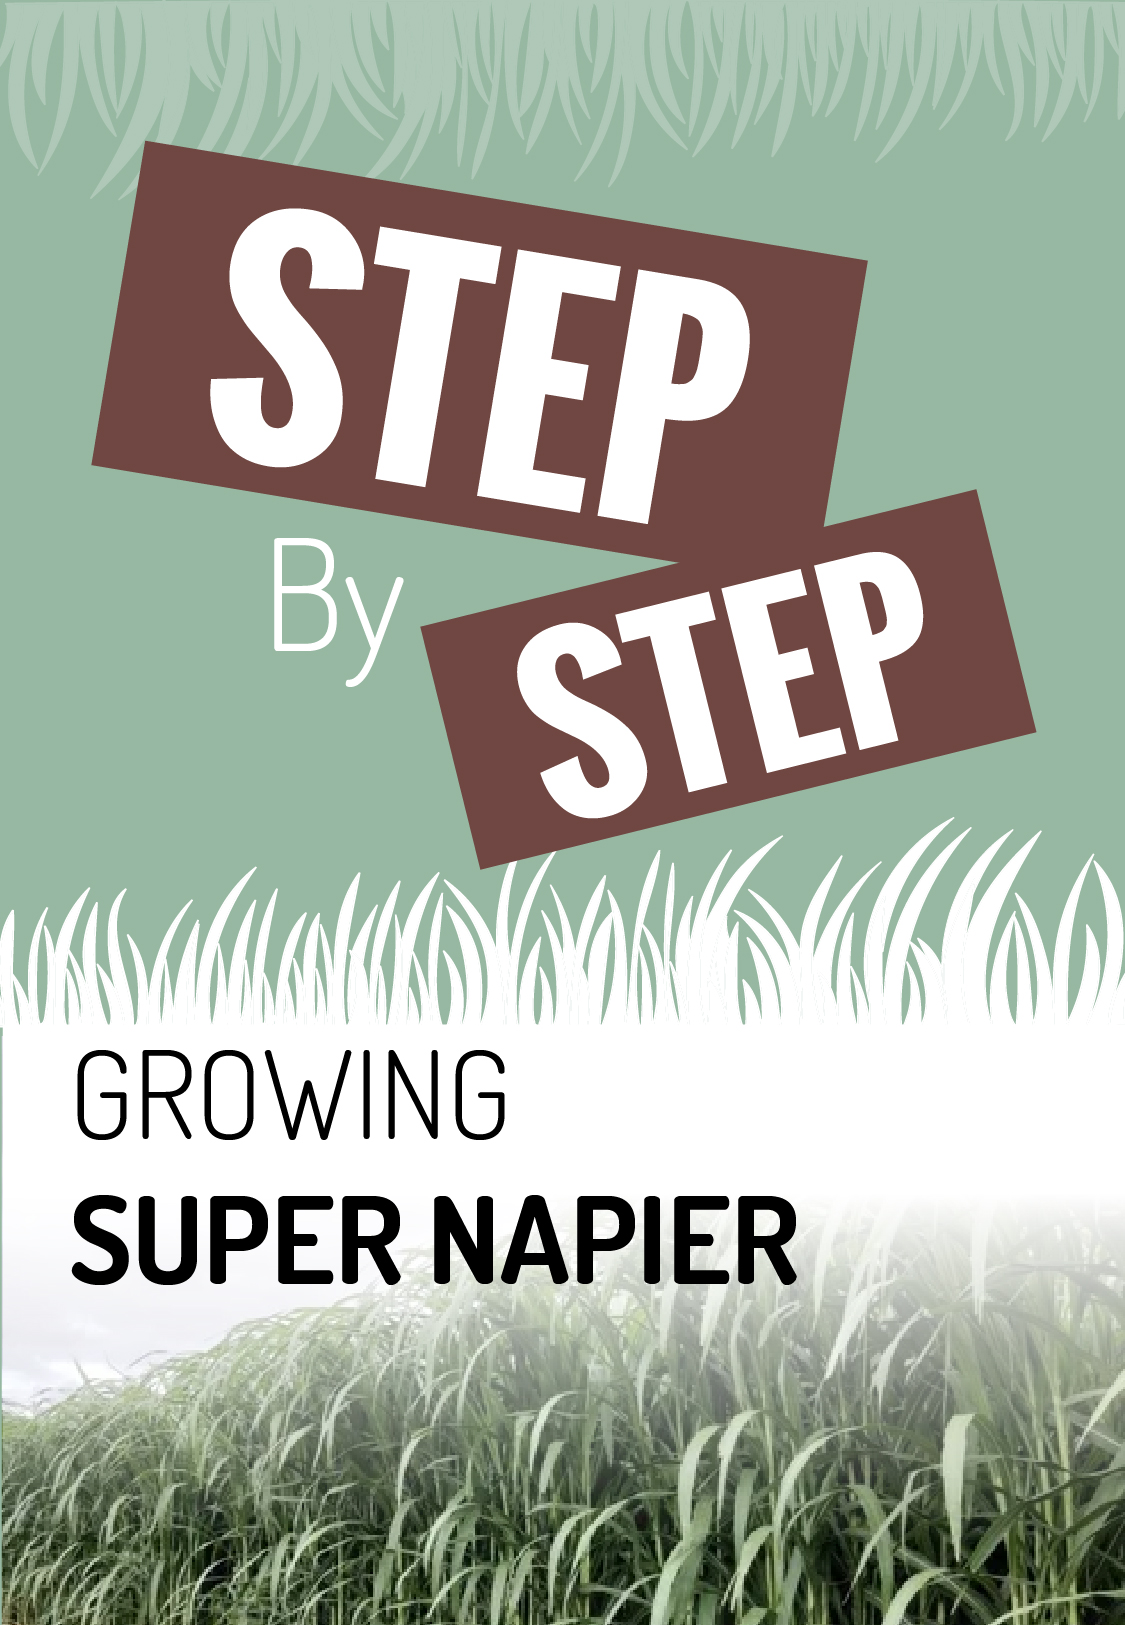 Step by step growing Super Napier